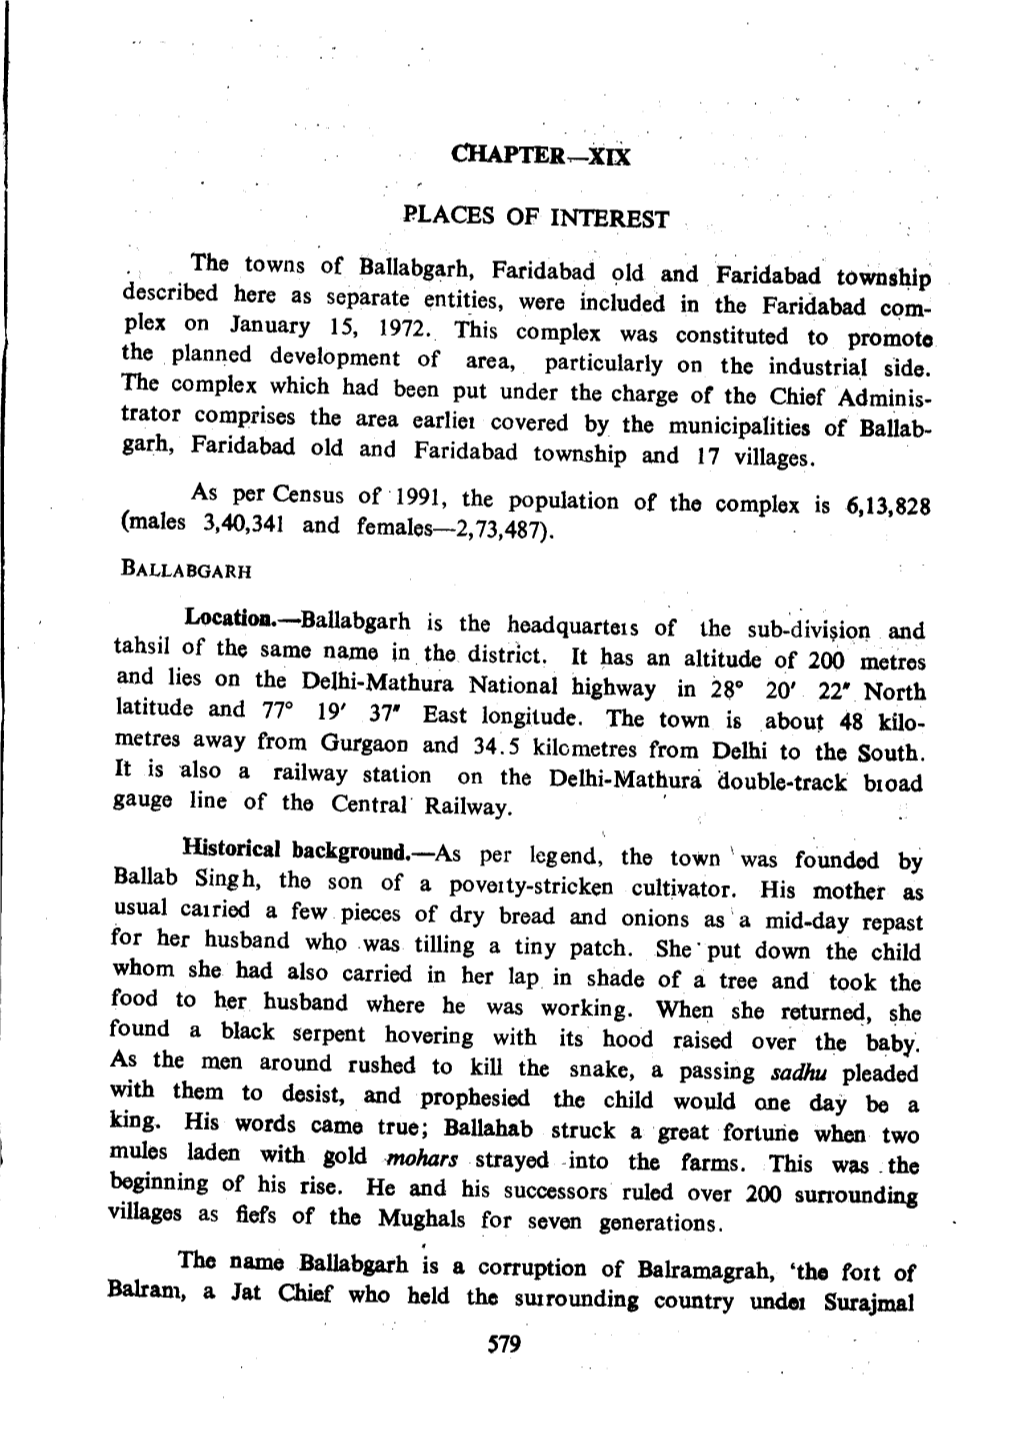 Ballabgarh, Faridabad ~Ld and Faridabad Townsb,Ip Described Here As Separate Entities, Were Included in the Faridabad Com- Plex on January 15, 1972